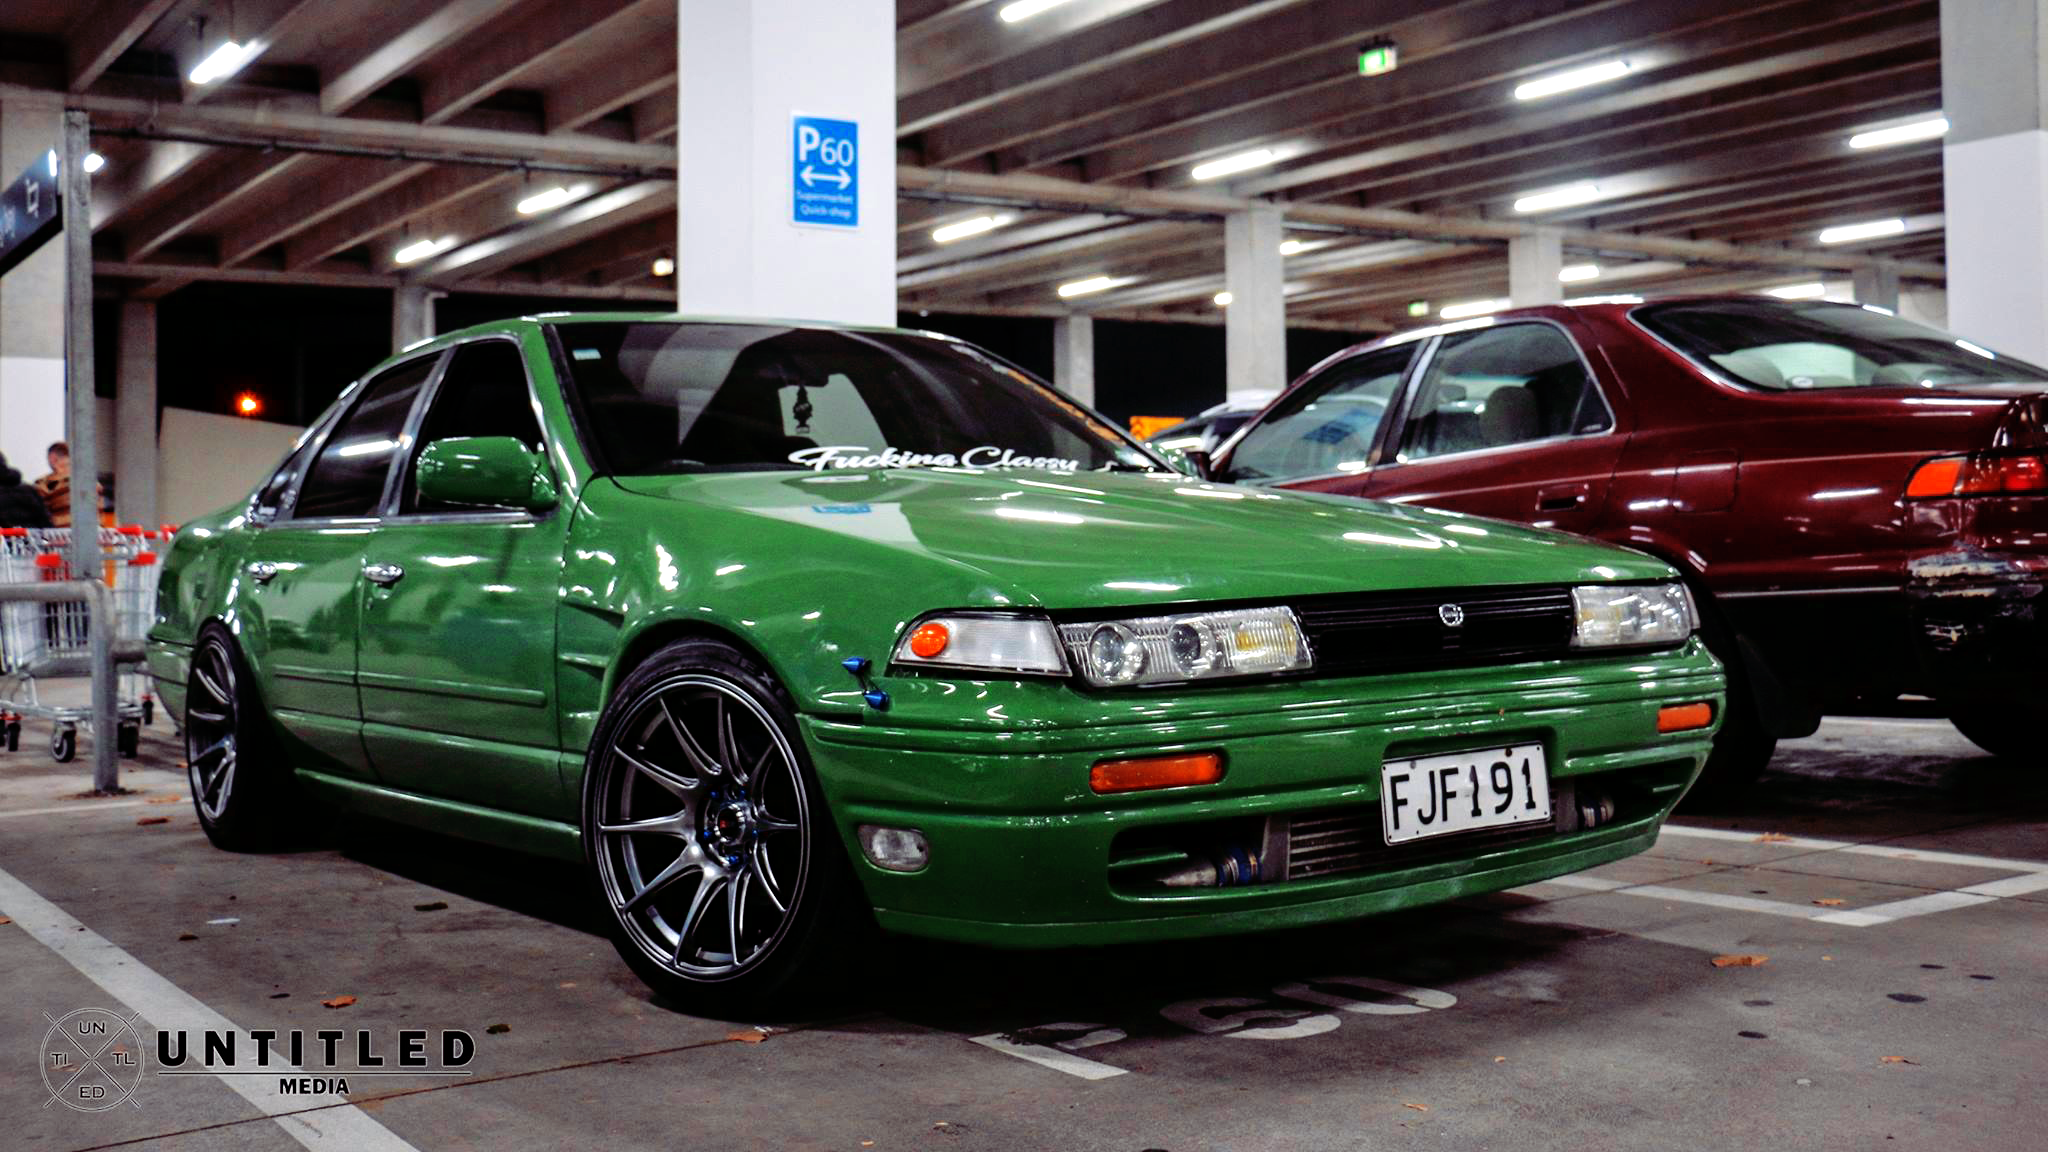 General 2048x1152 Japanese cars Untitled Media photography green cars car vehicle numbers parking garage